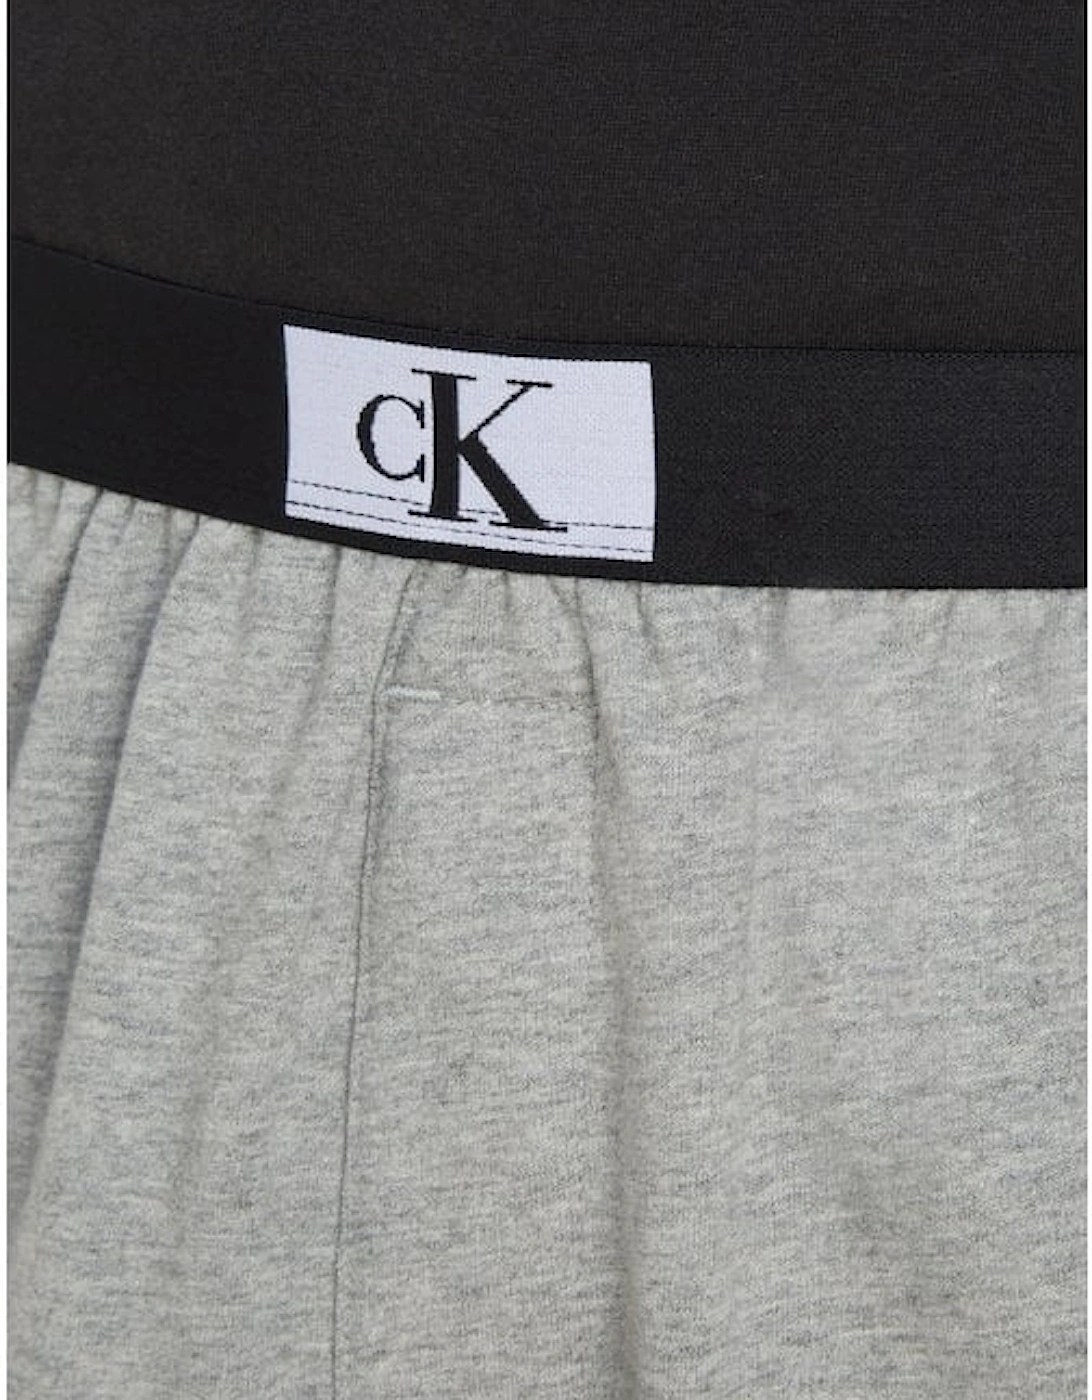 CK 96 French Terry Lounge Shorts, Grey Heather